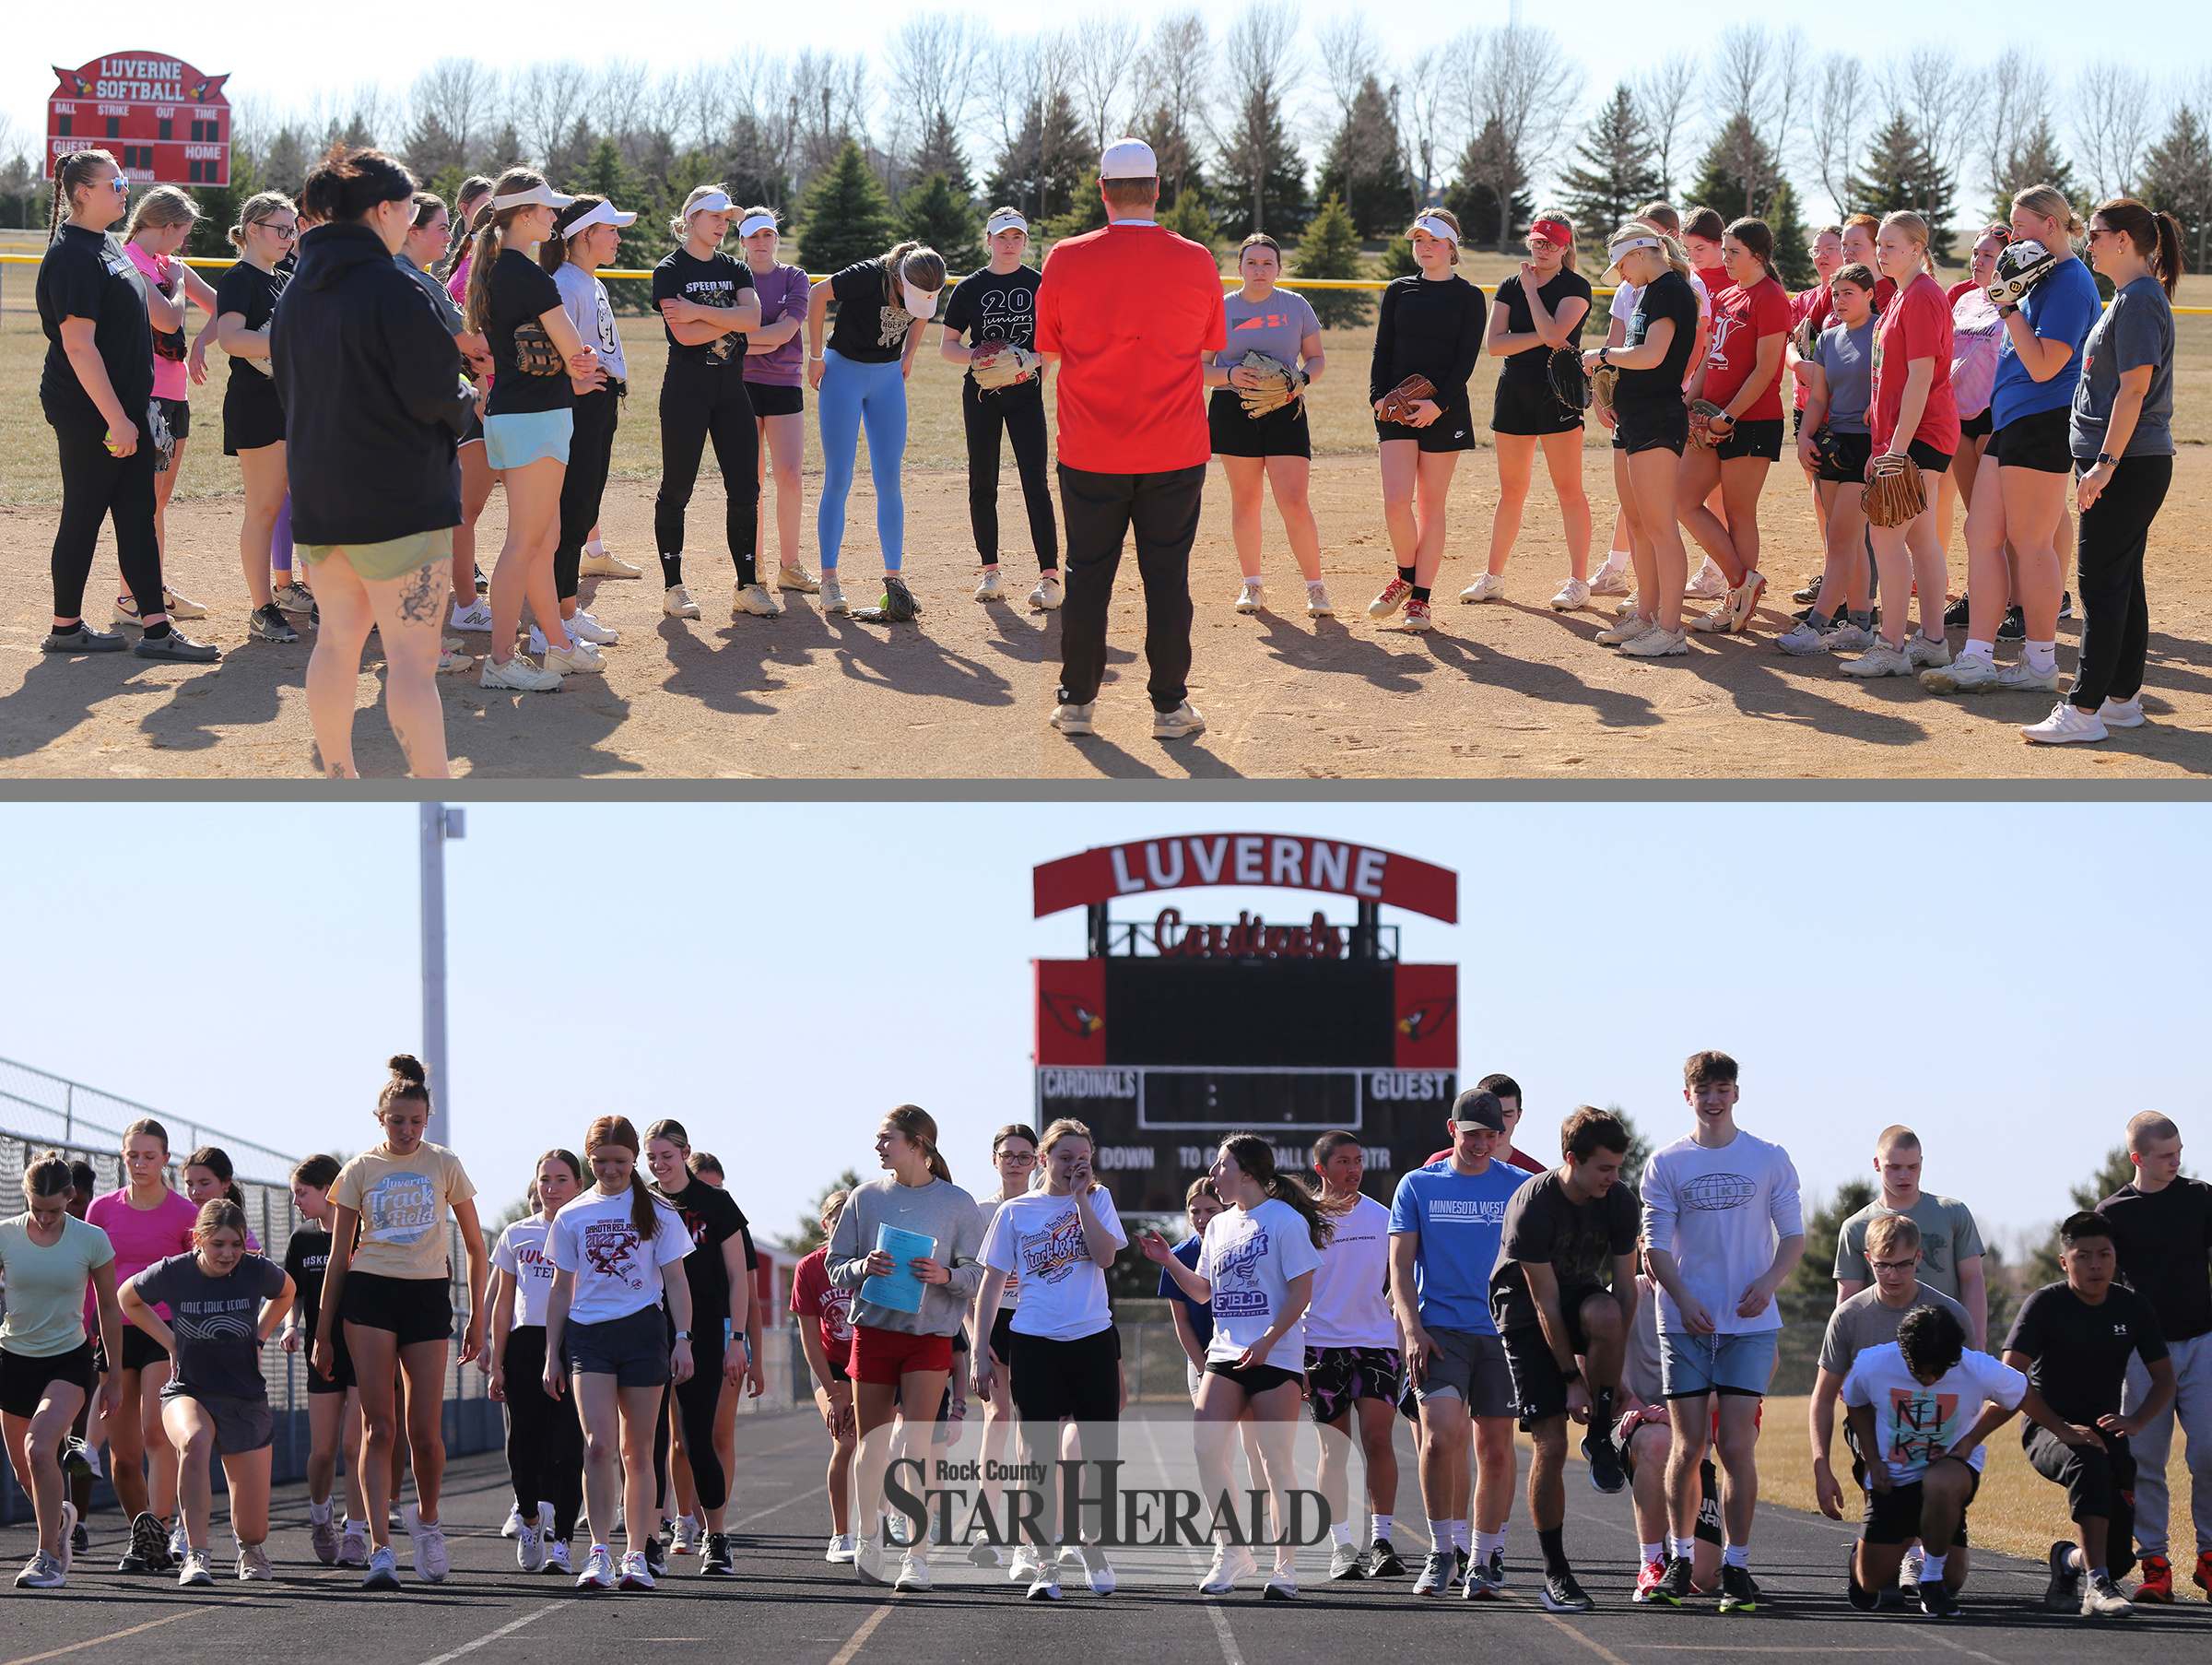 Top: Luverne junior varsity and varsity girls’ softball teams practice together in warm 69-degree weather. Bottom: The Luverne track and field teams enjoy spring training in warm temperatures Tuesday, March 12. Greg Hoogeveen photos